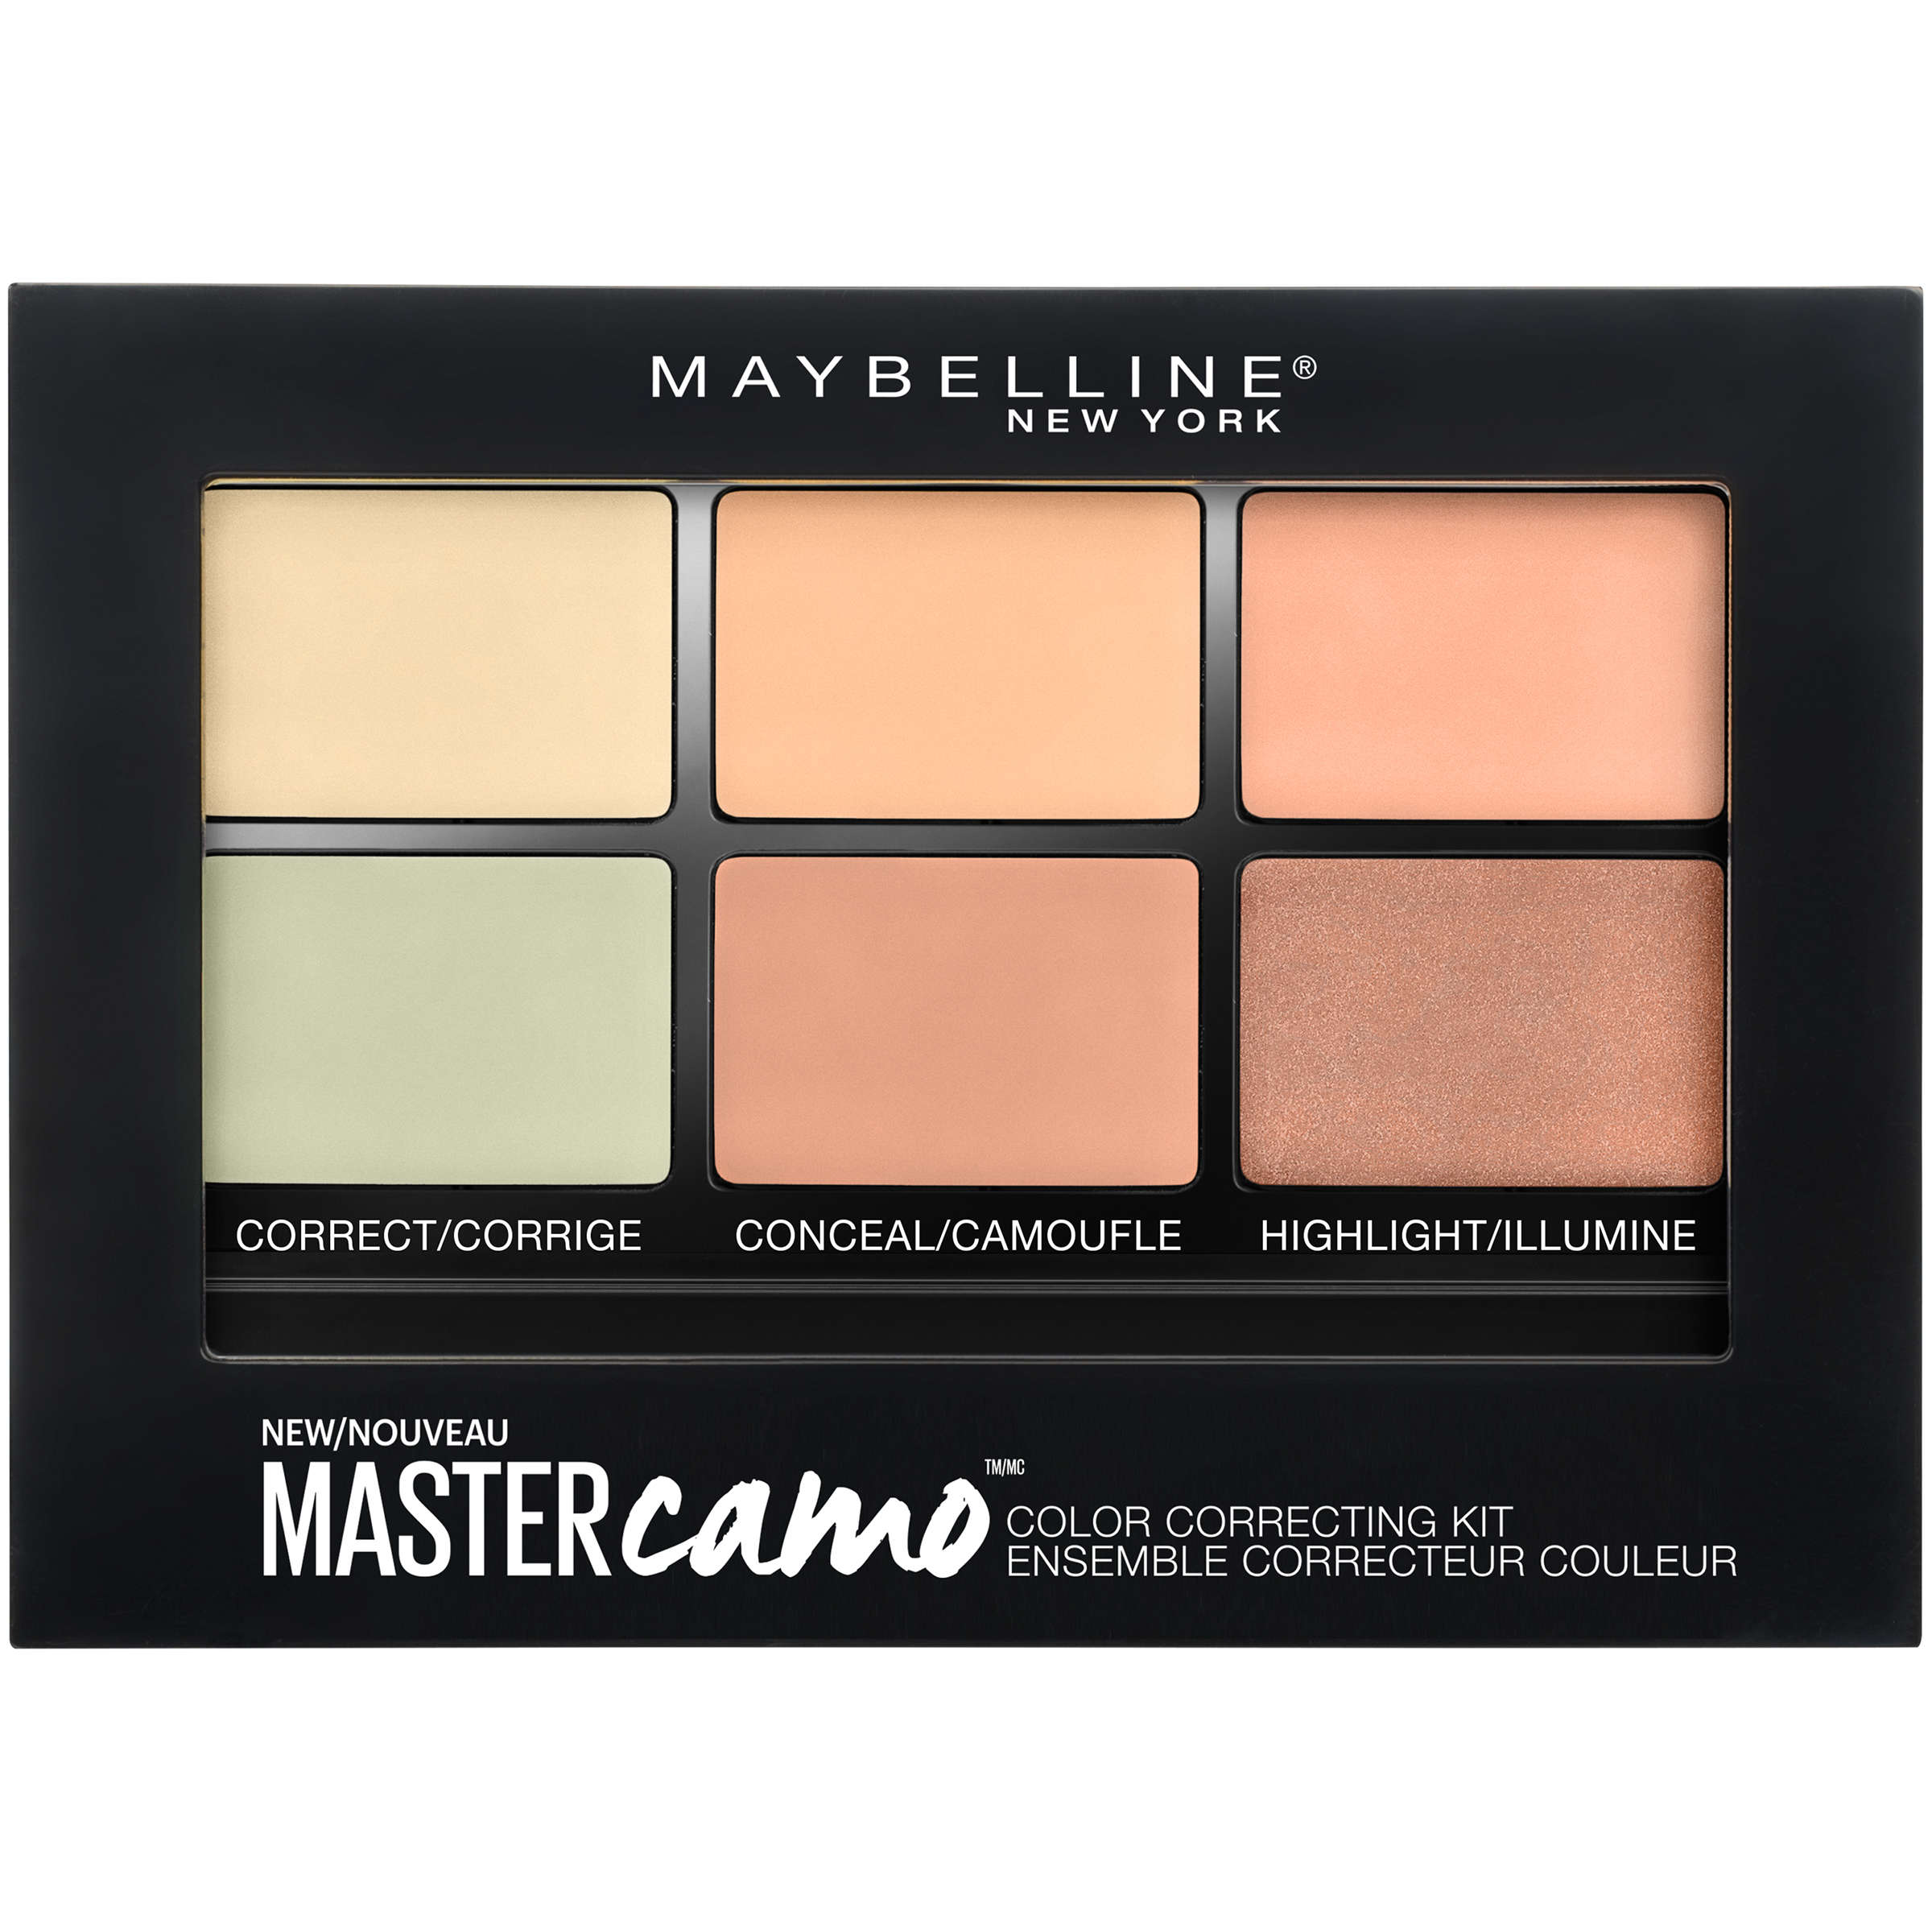 Maybelline New York Facestudio Master Camo Color Correcting Kit - image 3 of 6